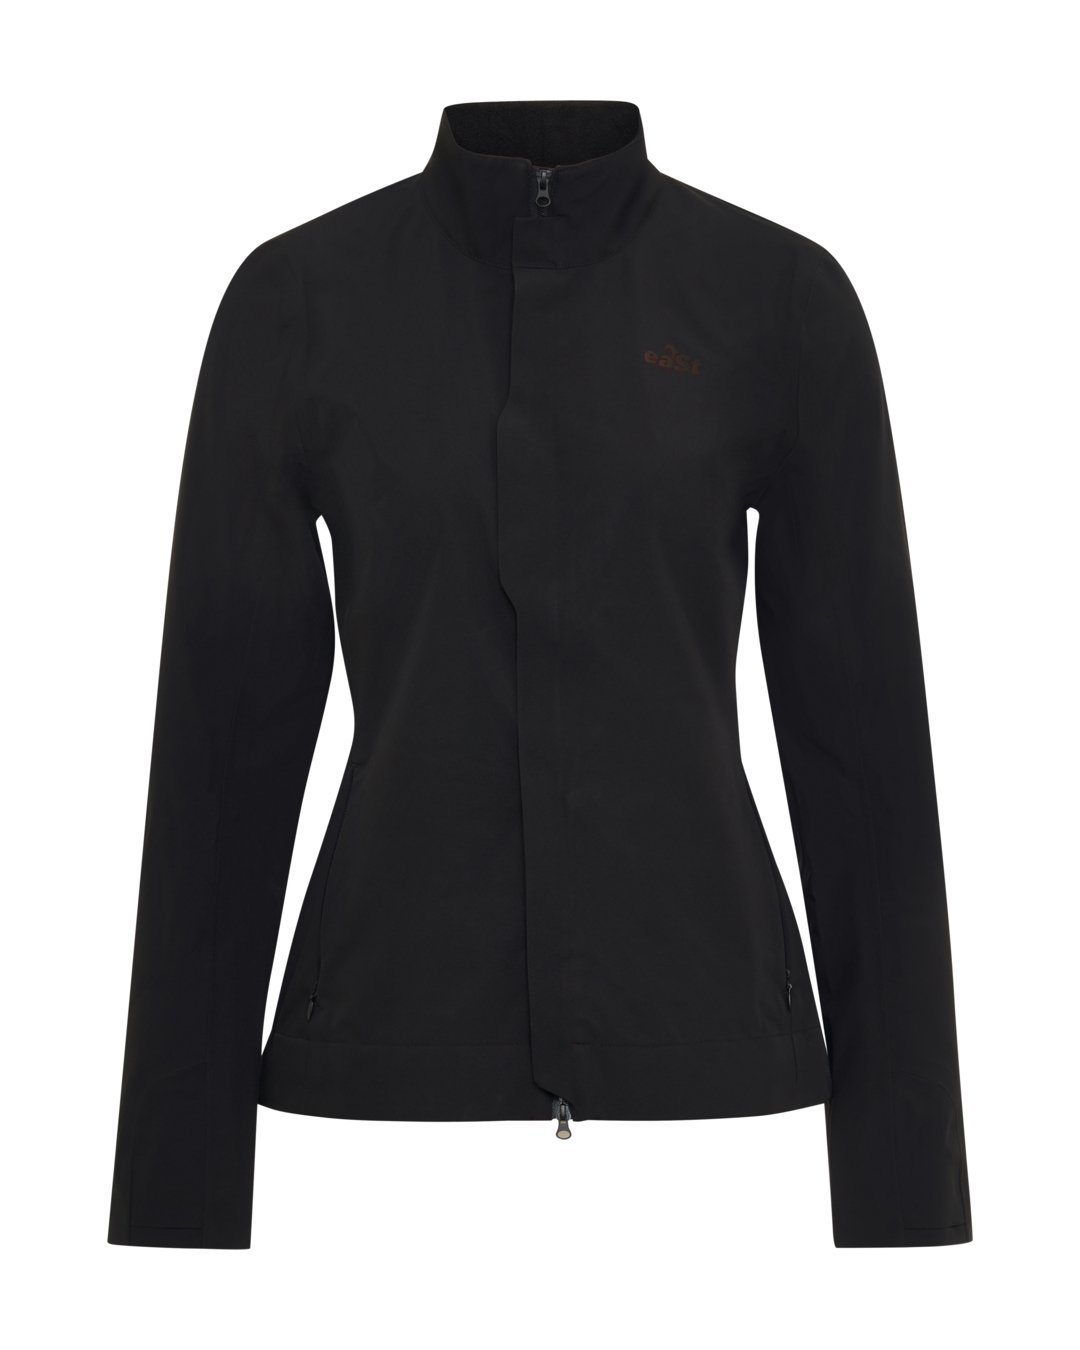 Reitjacke All-Weather Performance S Black